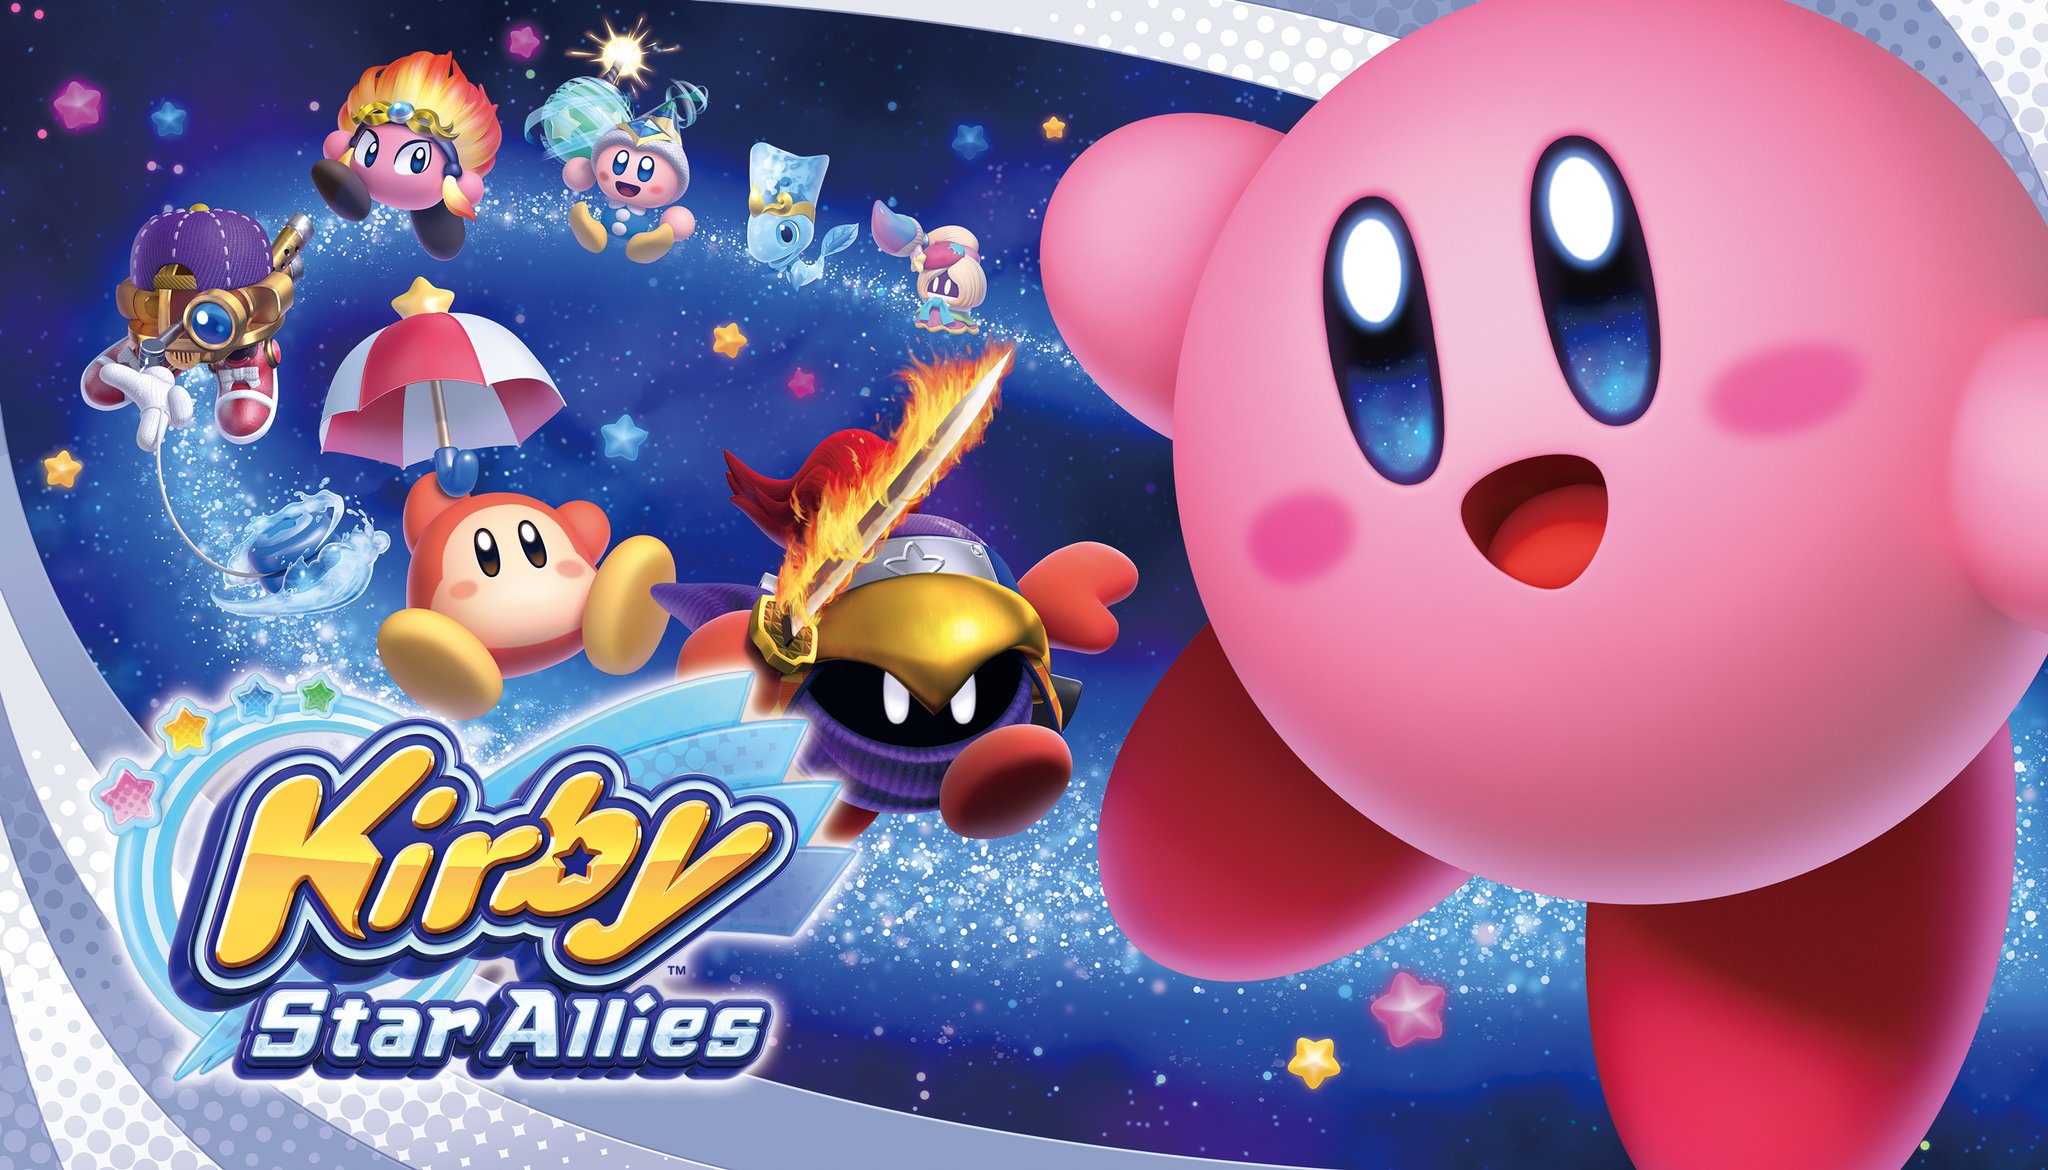 How to play kirby star allies on pc download